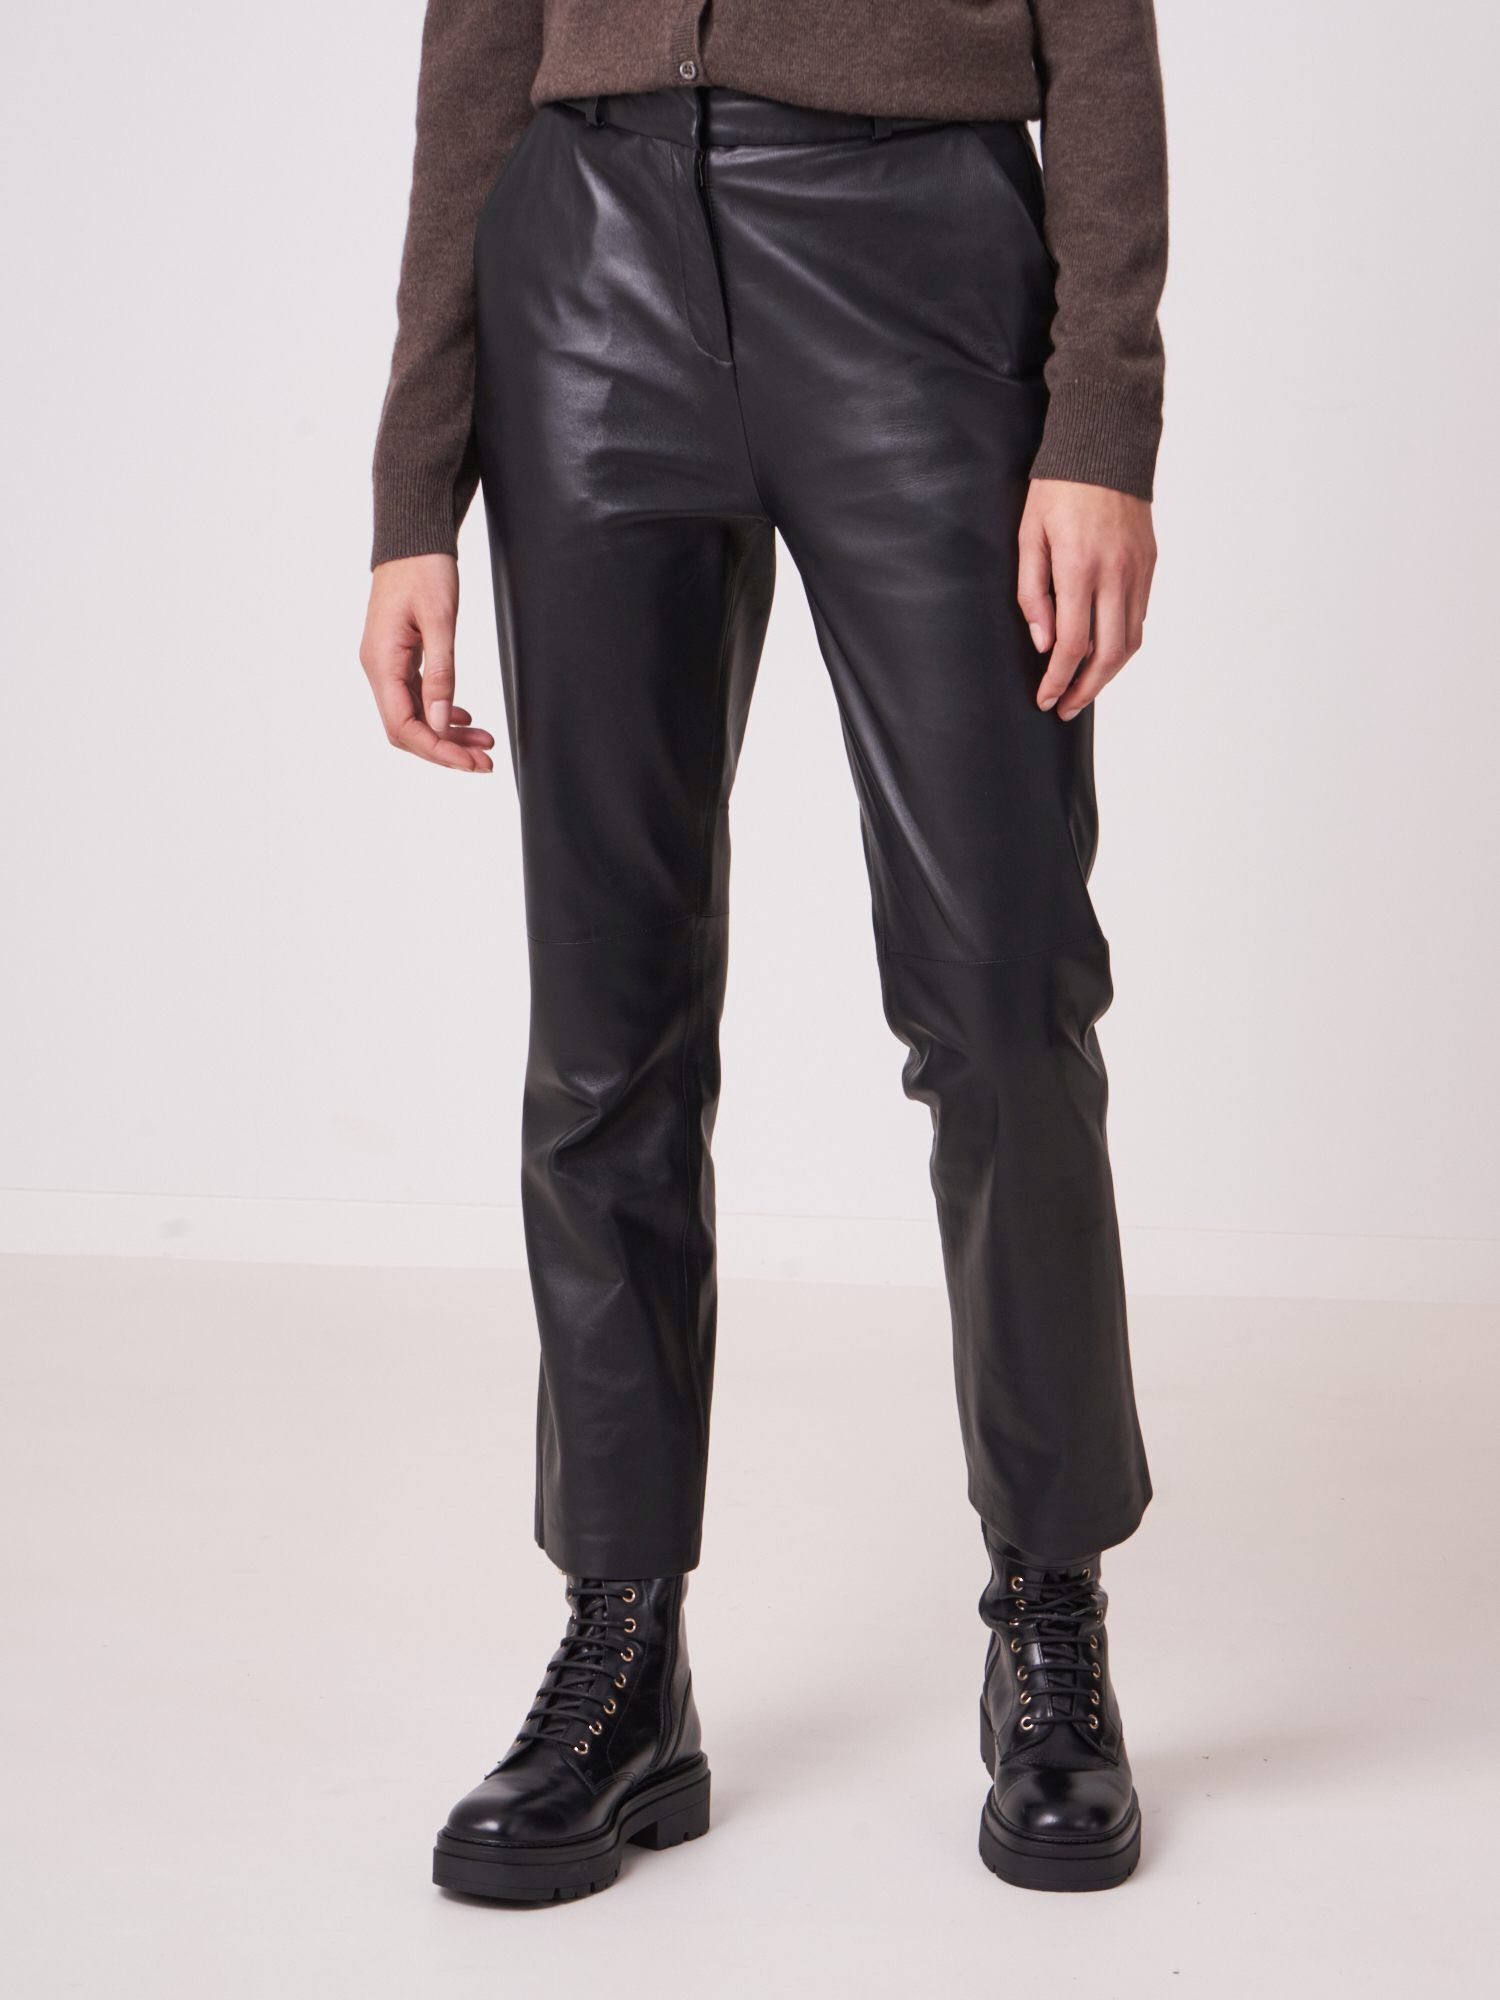 nutempelor レザーパンツ WIDE PU LEATHER PANTS | www ...